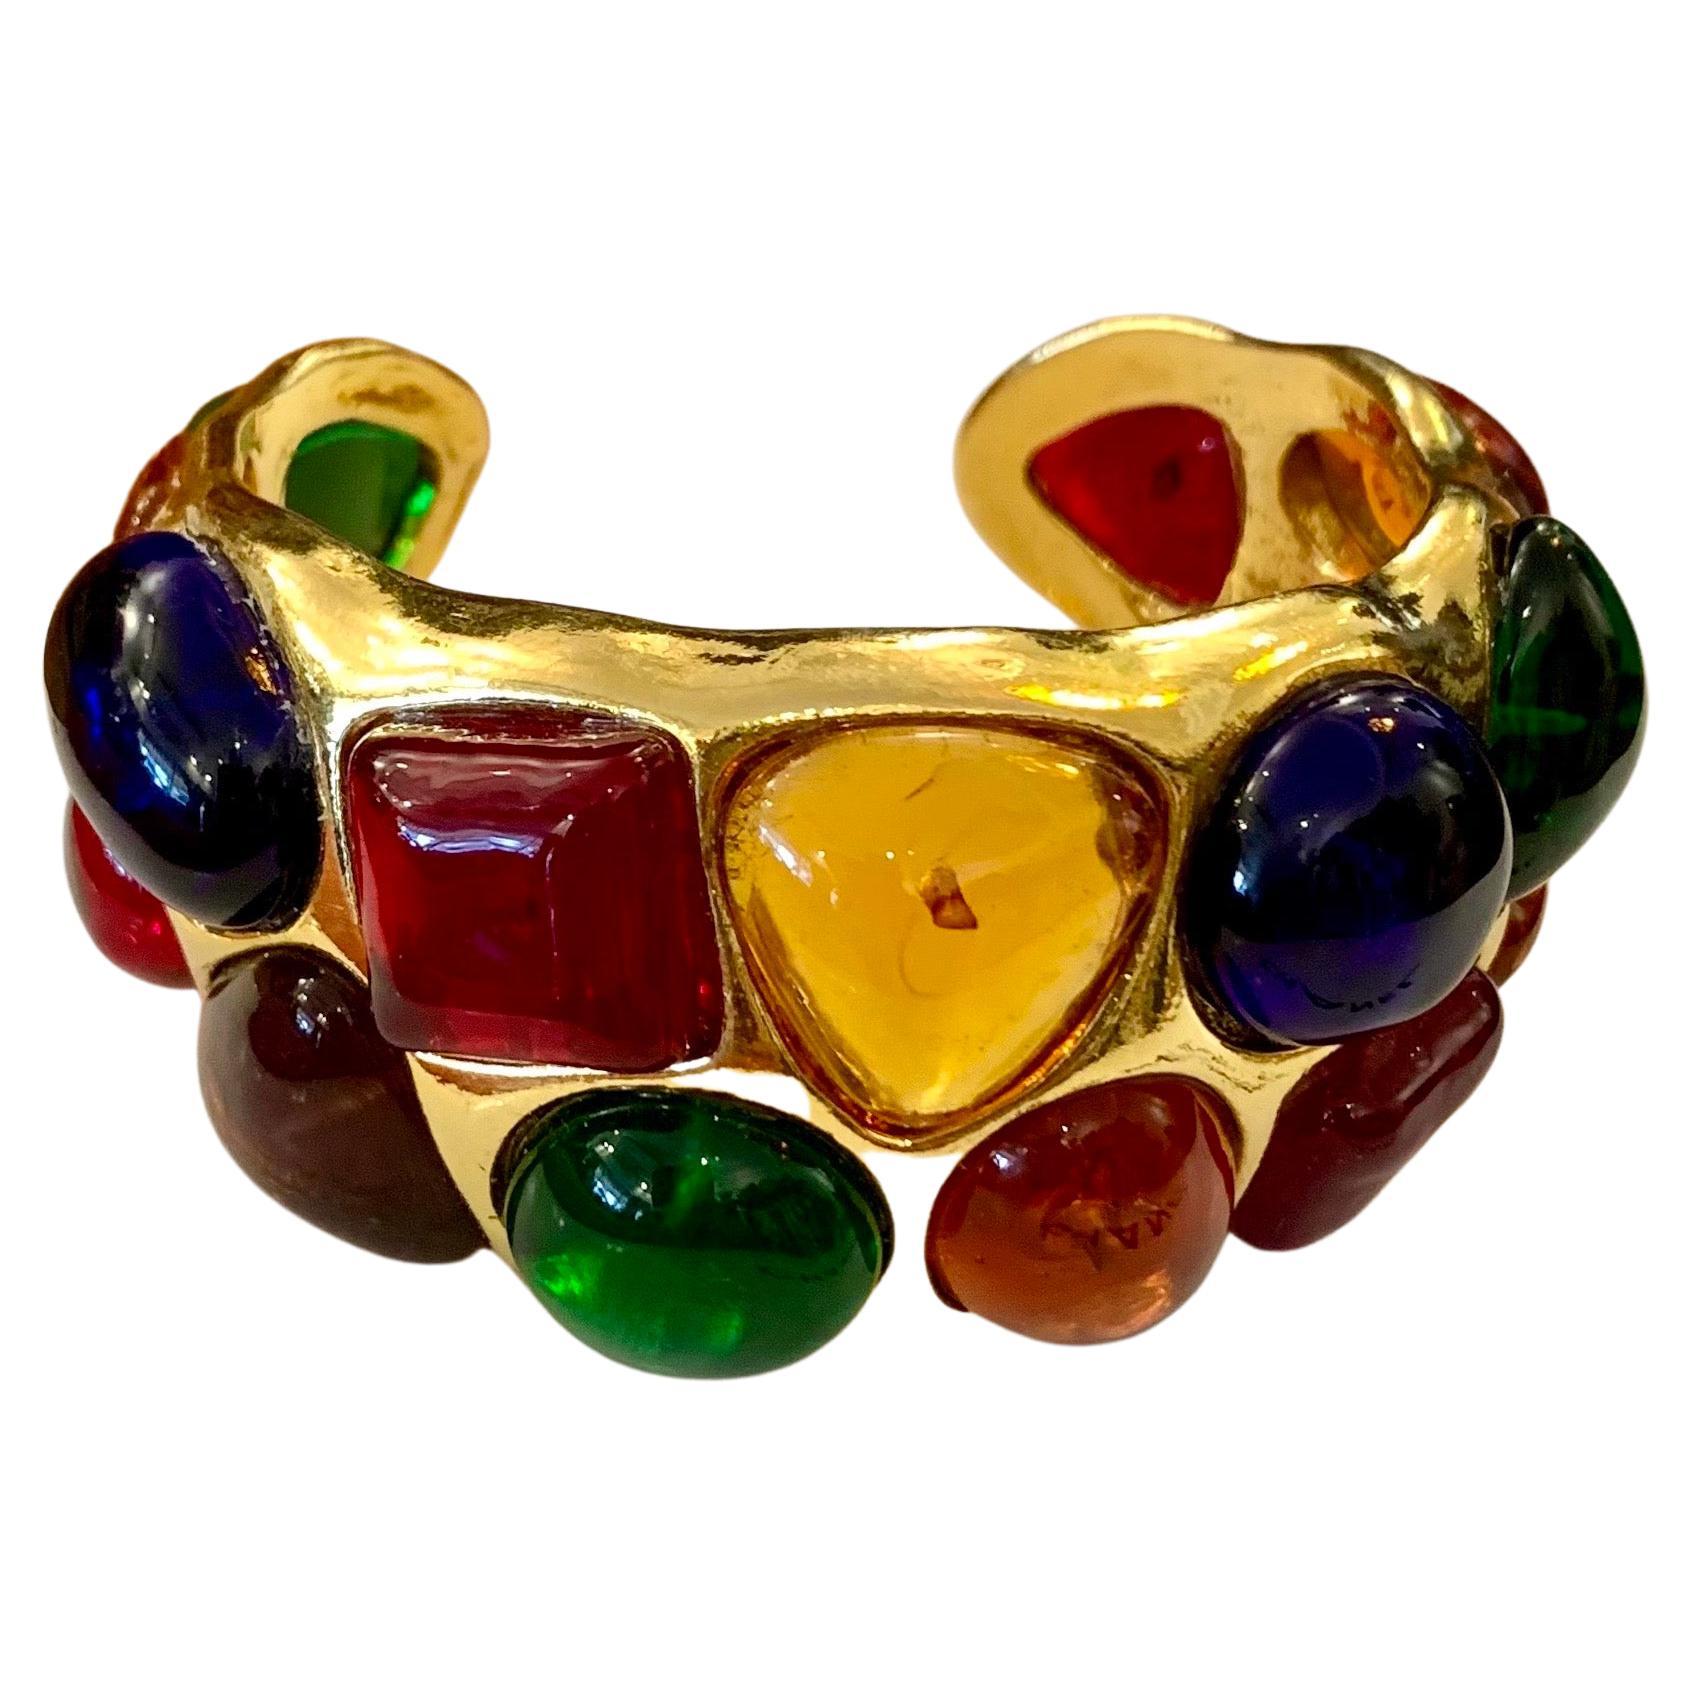 1980s Vintage CHANEL Gold Toned Multicolored Gripoix Poured Glass Bracelet Cuff For Sale